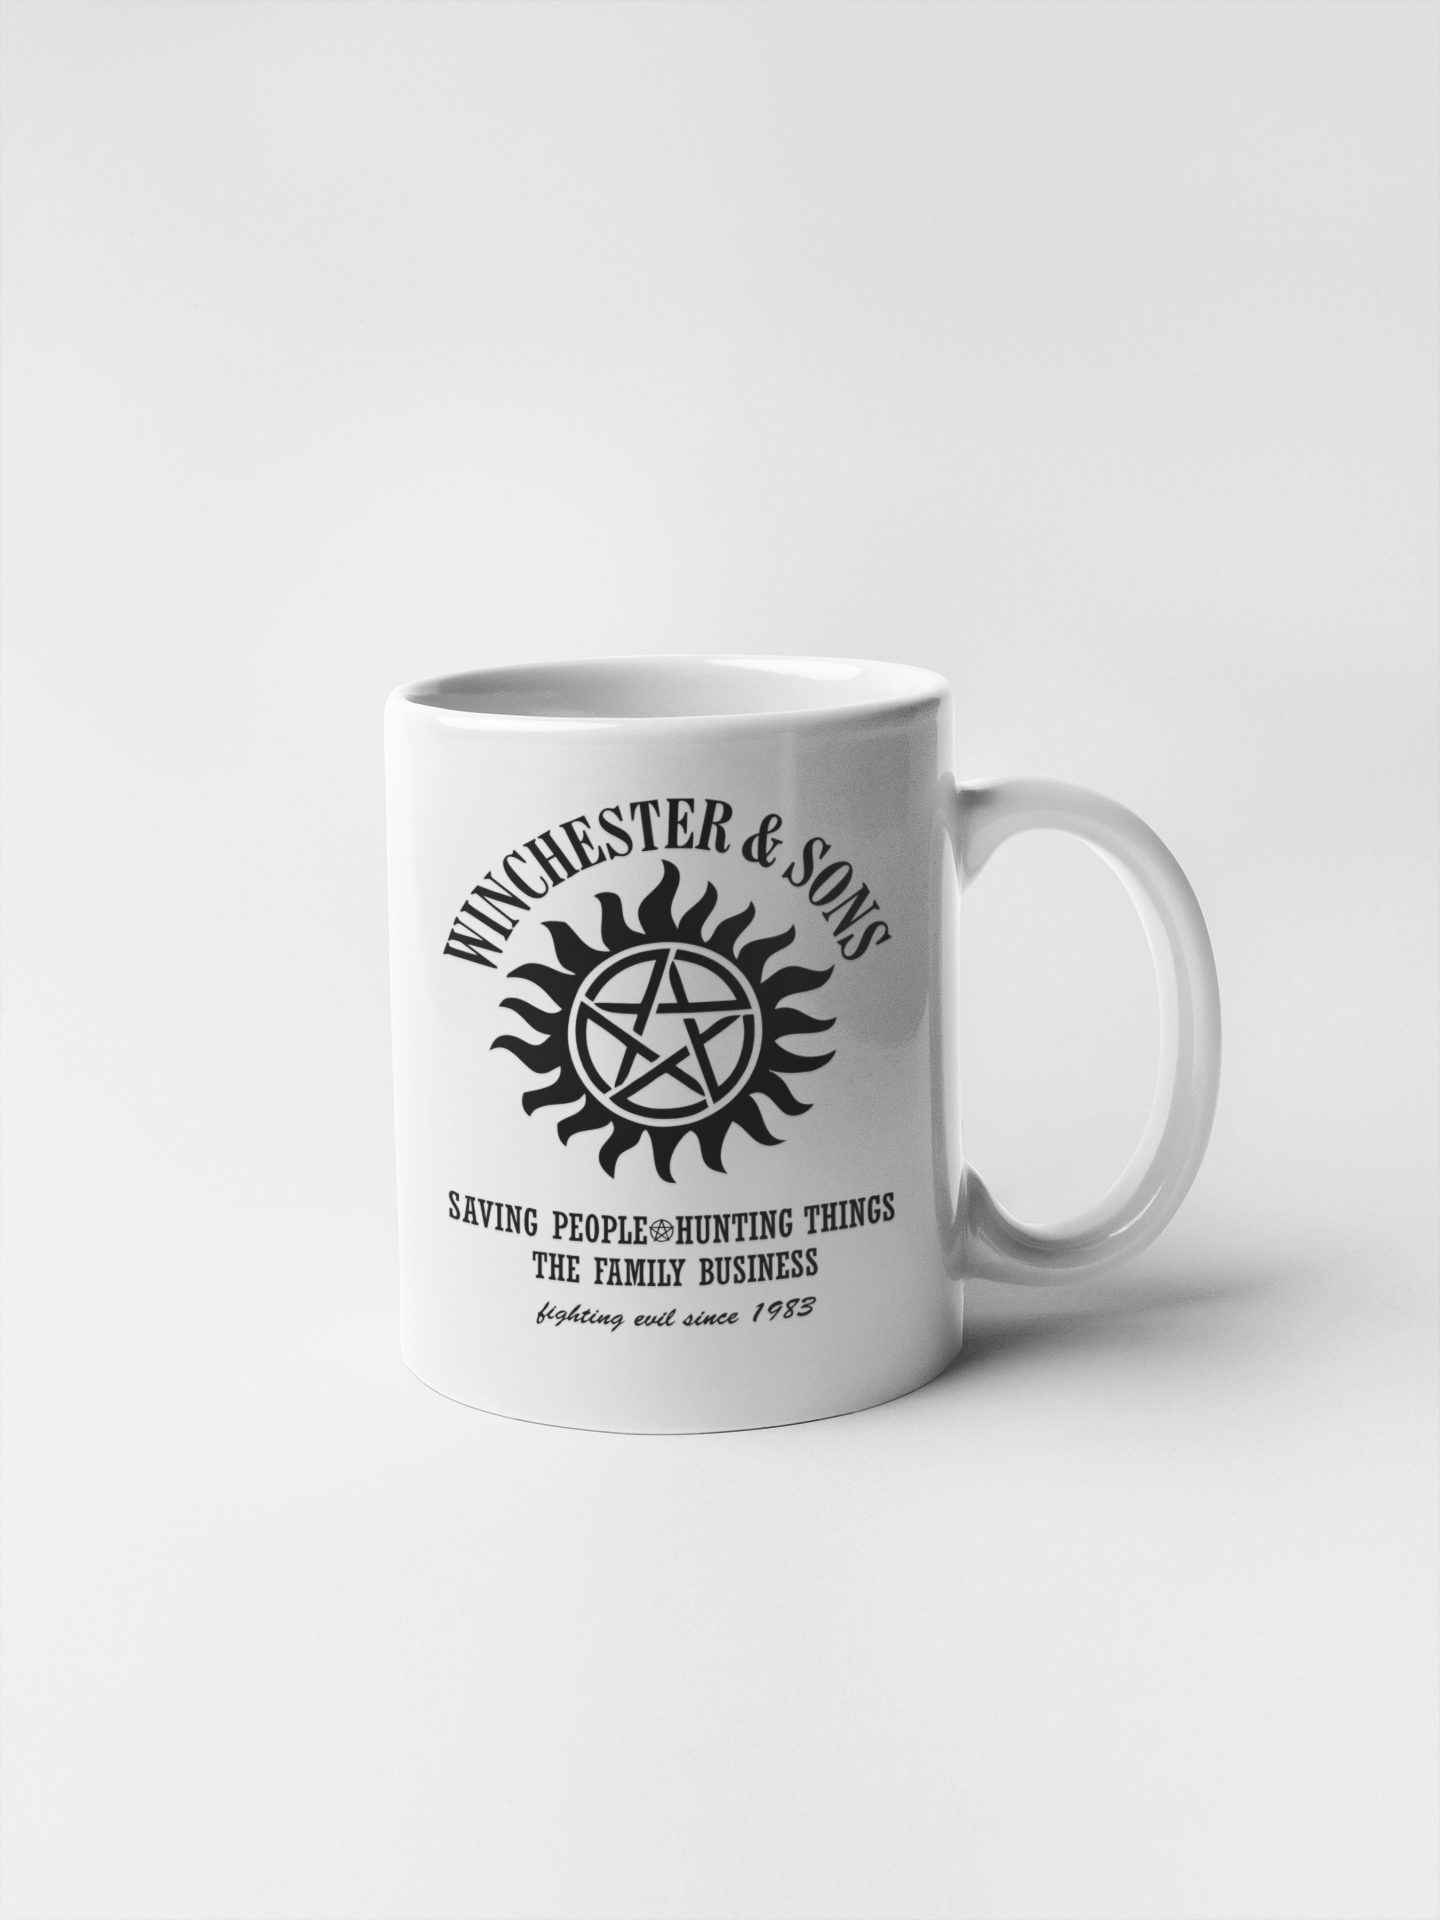 Winchesters and Sons Ceramic Coffee Mugs